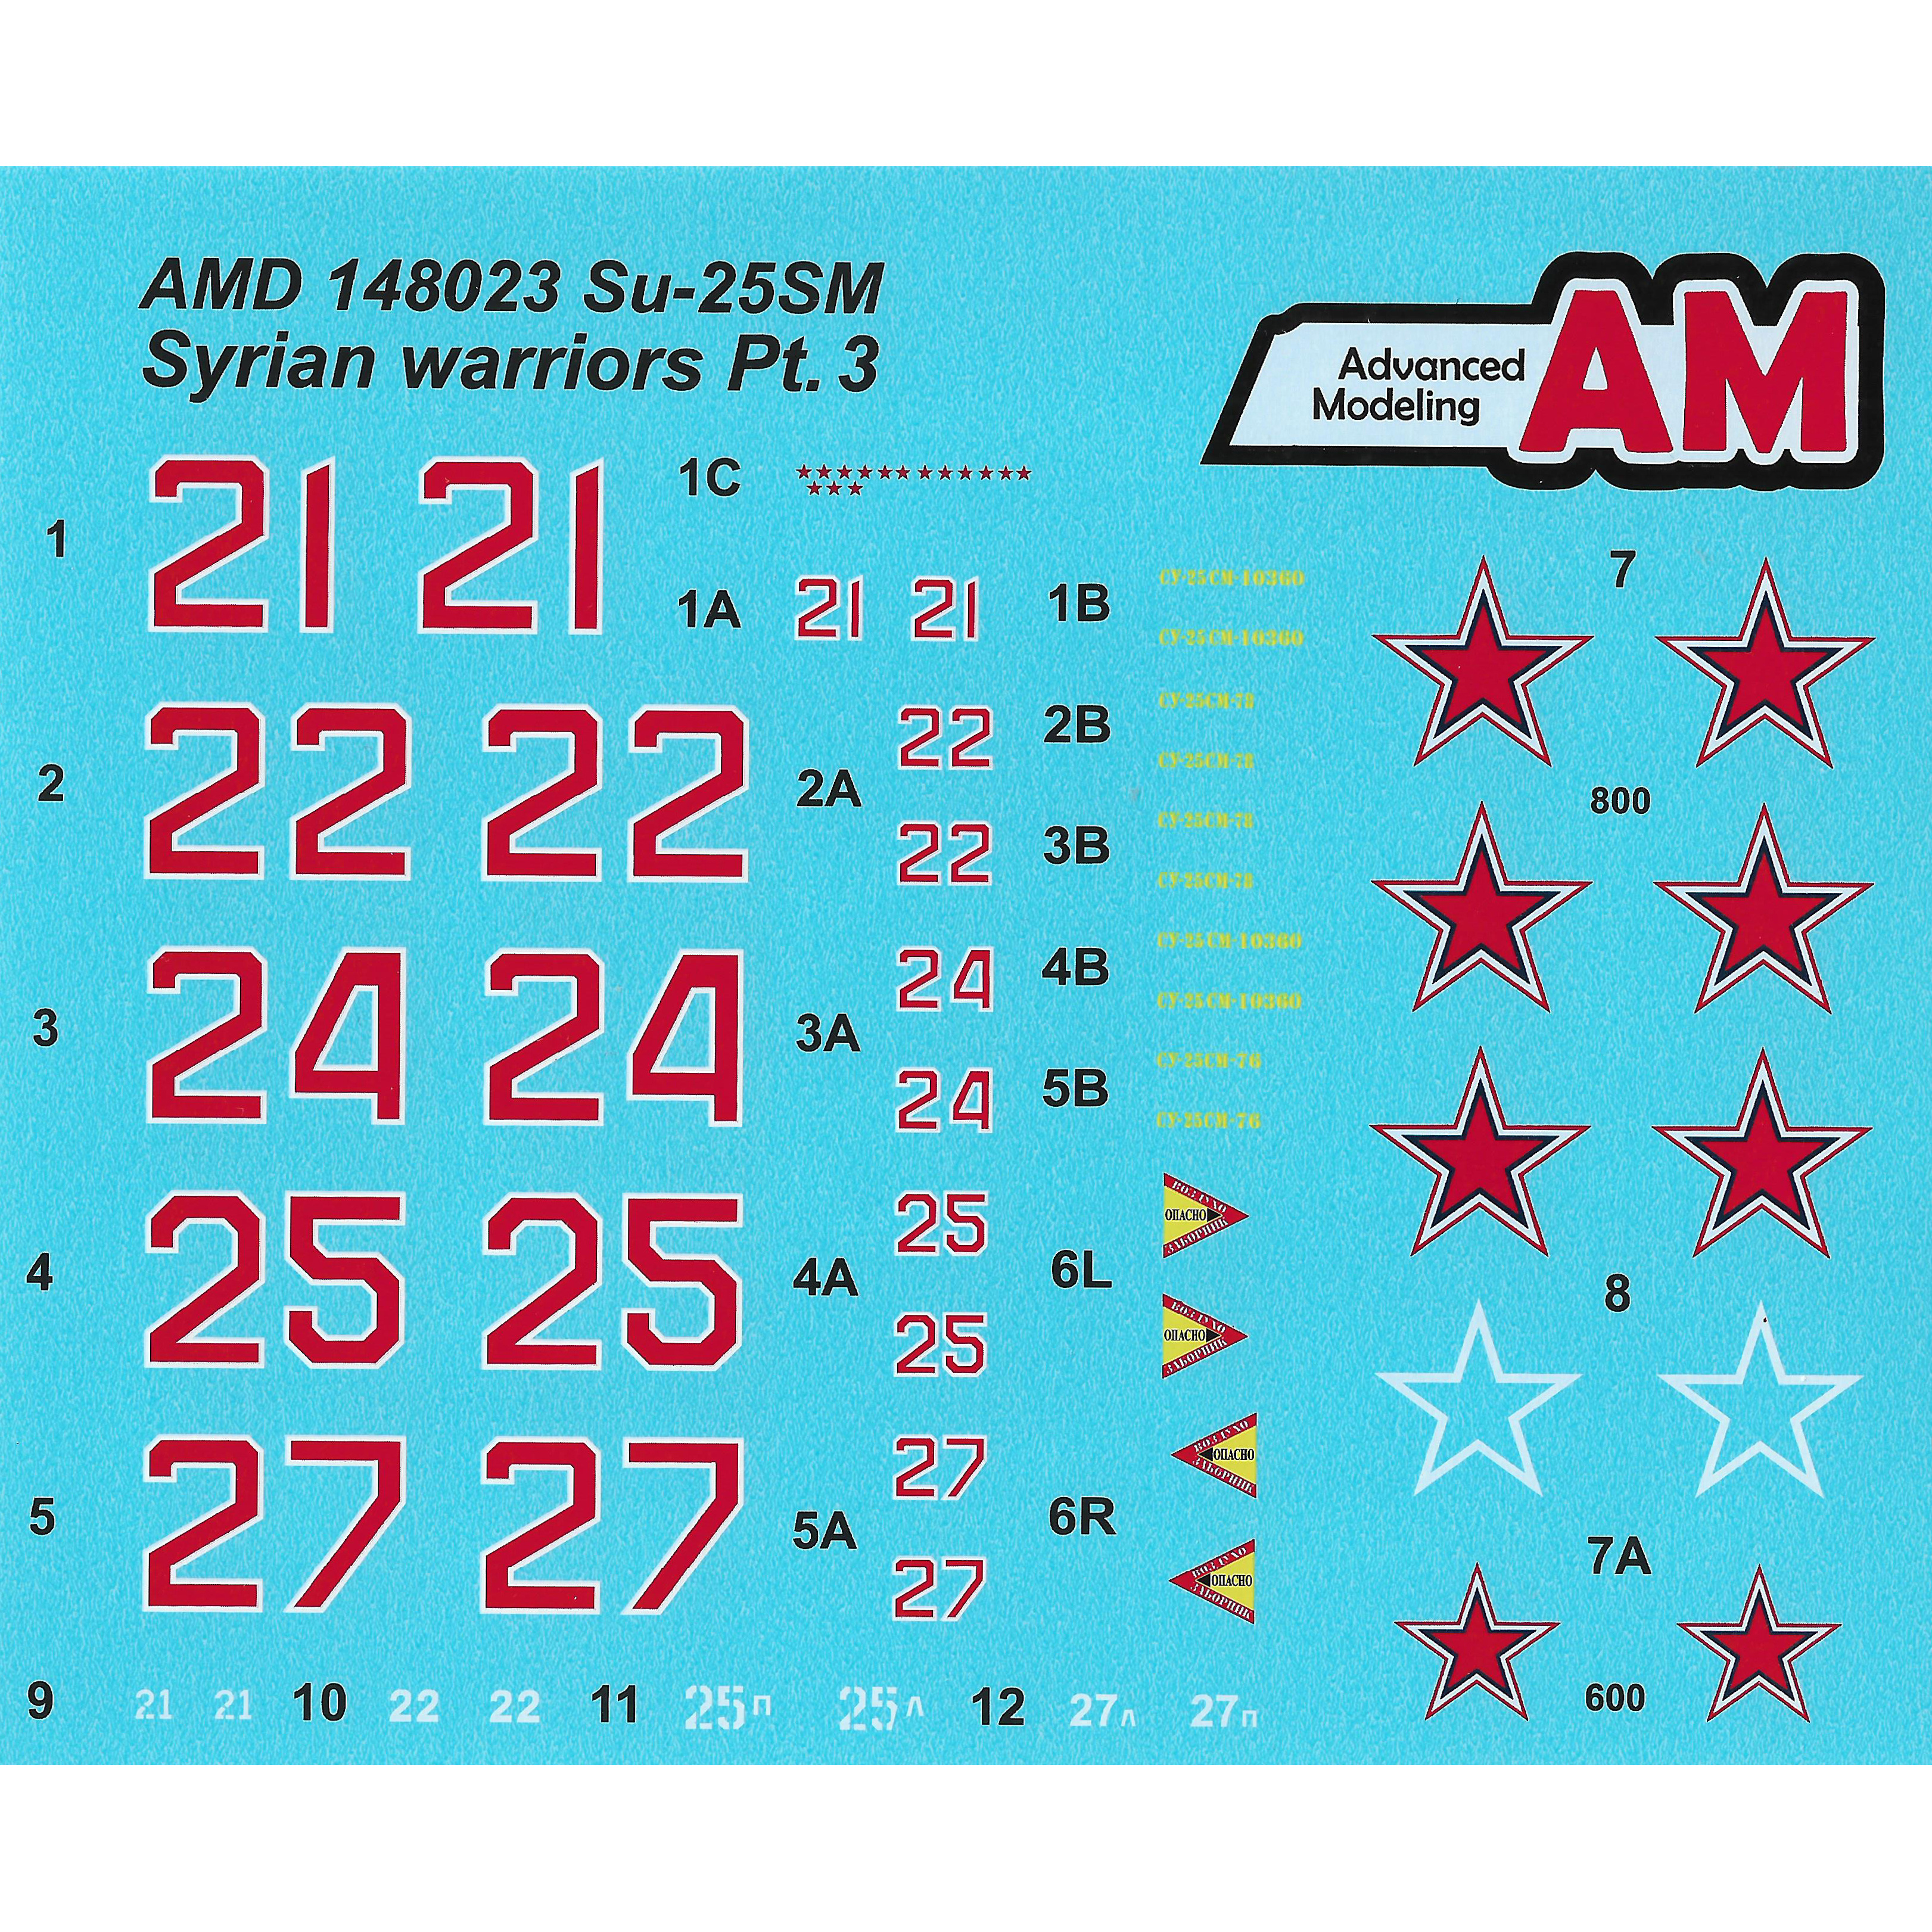 AMD148023 Advance Modeling 1/48 Decals for Sukhoi-25CM from the Russian Aerospace Forces Aviation Group in Syria, Khmeimim Airfield